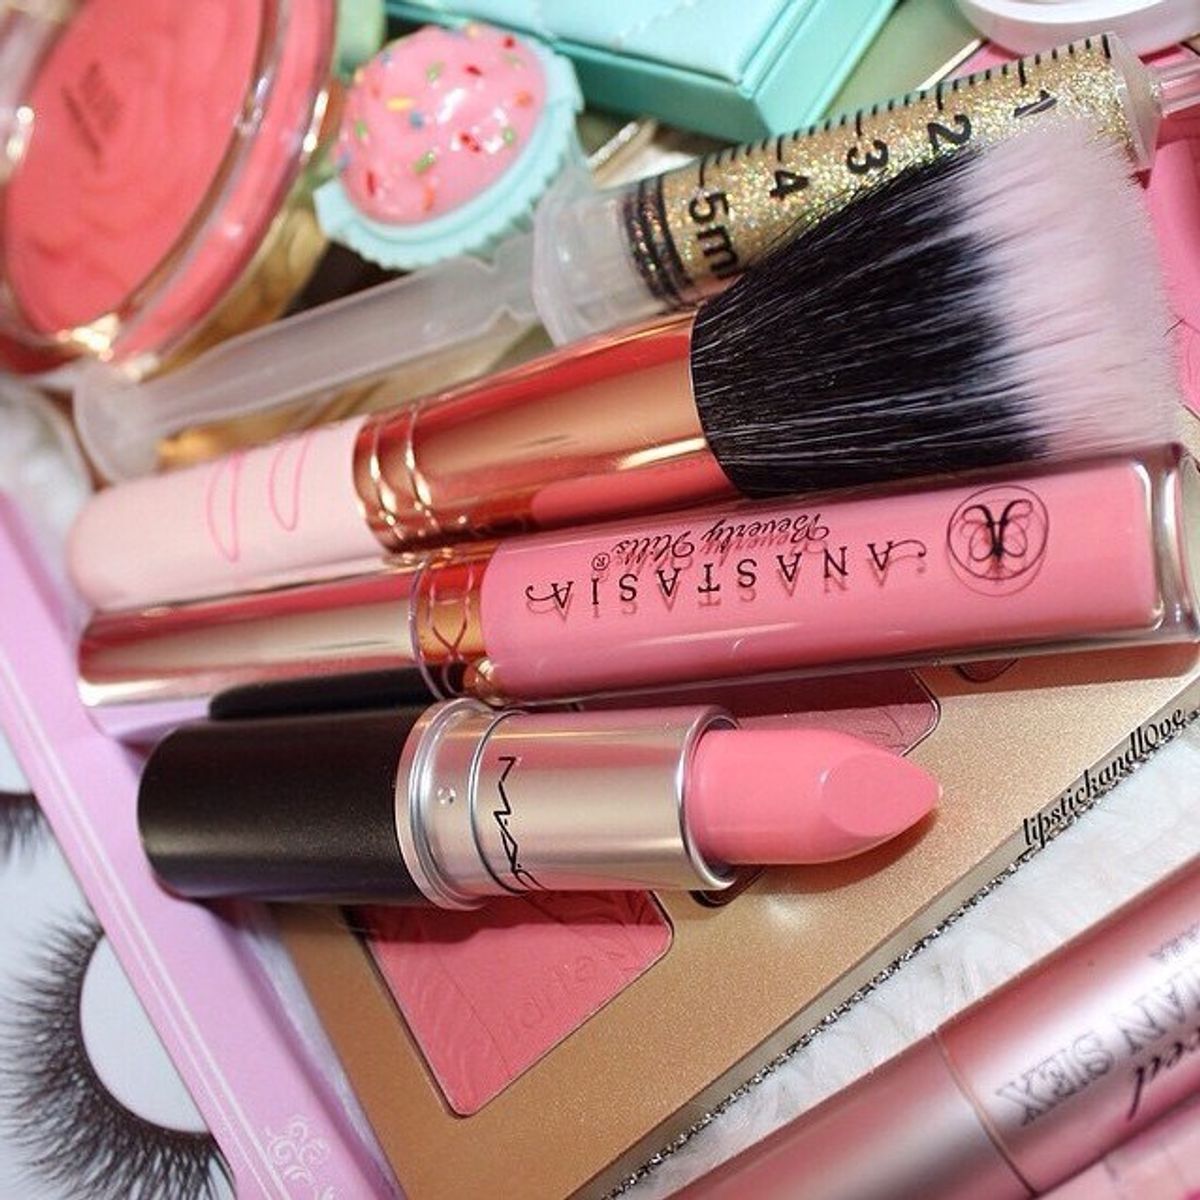 14 Makeup Products That Every Girl Should Own